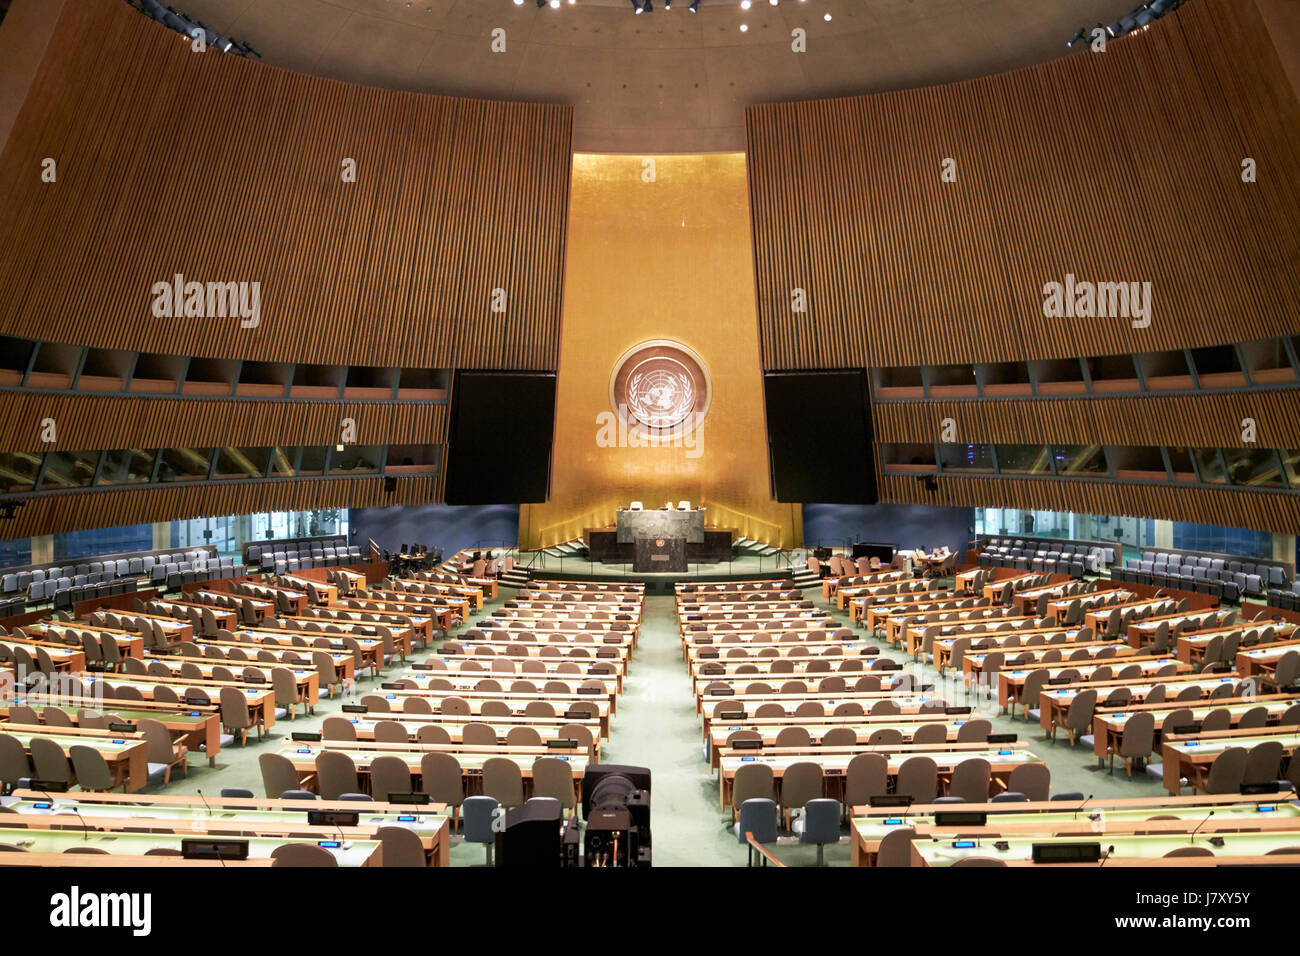 general assembly chamber hall at the United Nations headquarters building New York City USA Stock Photo